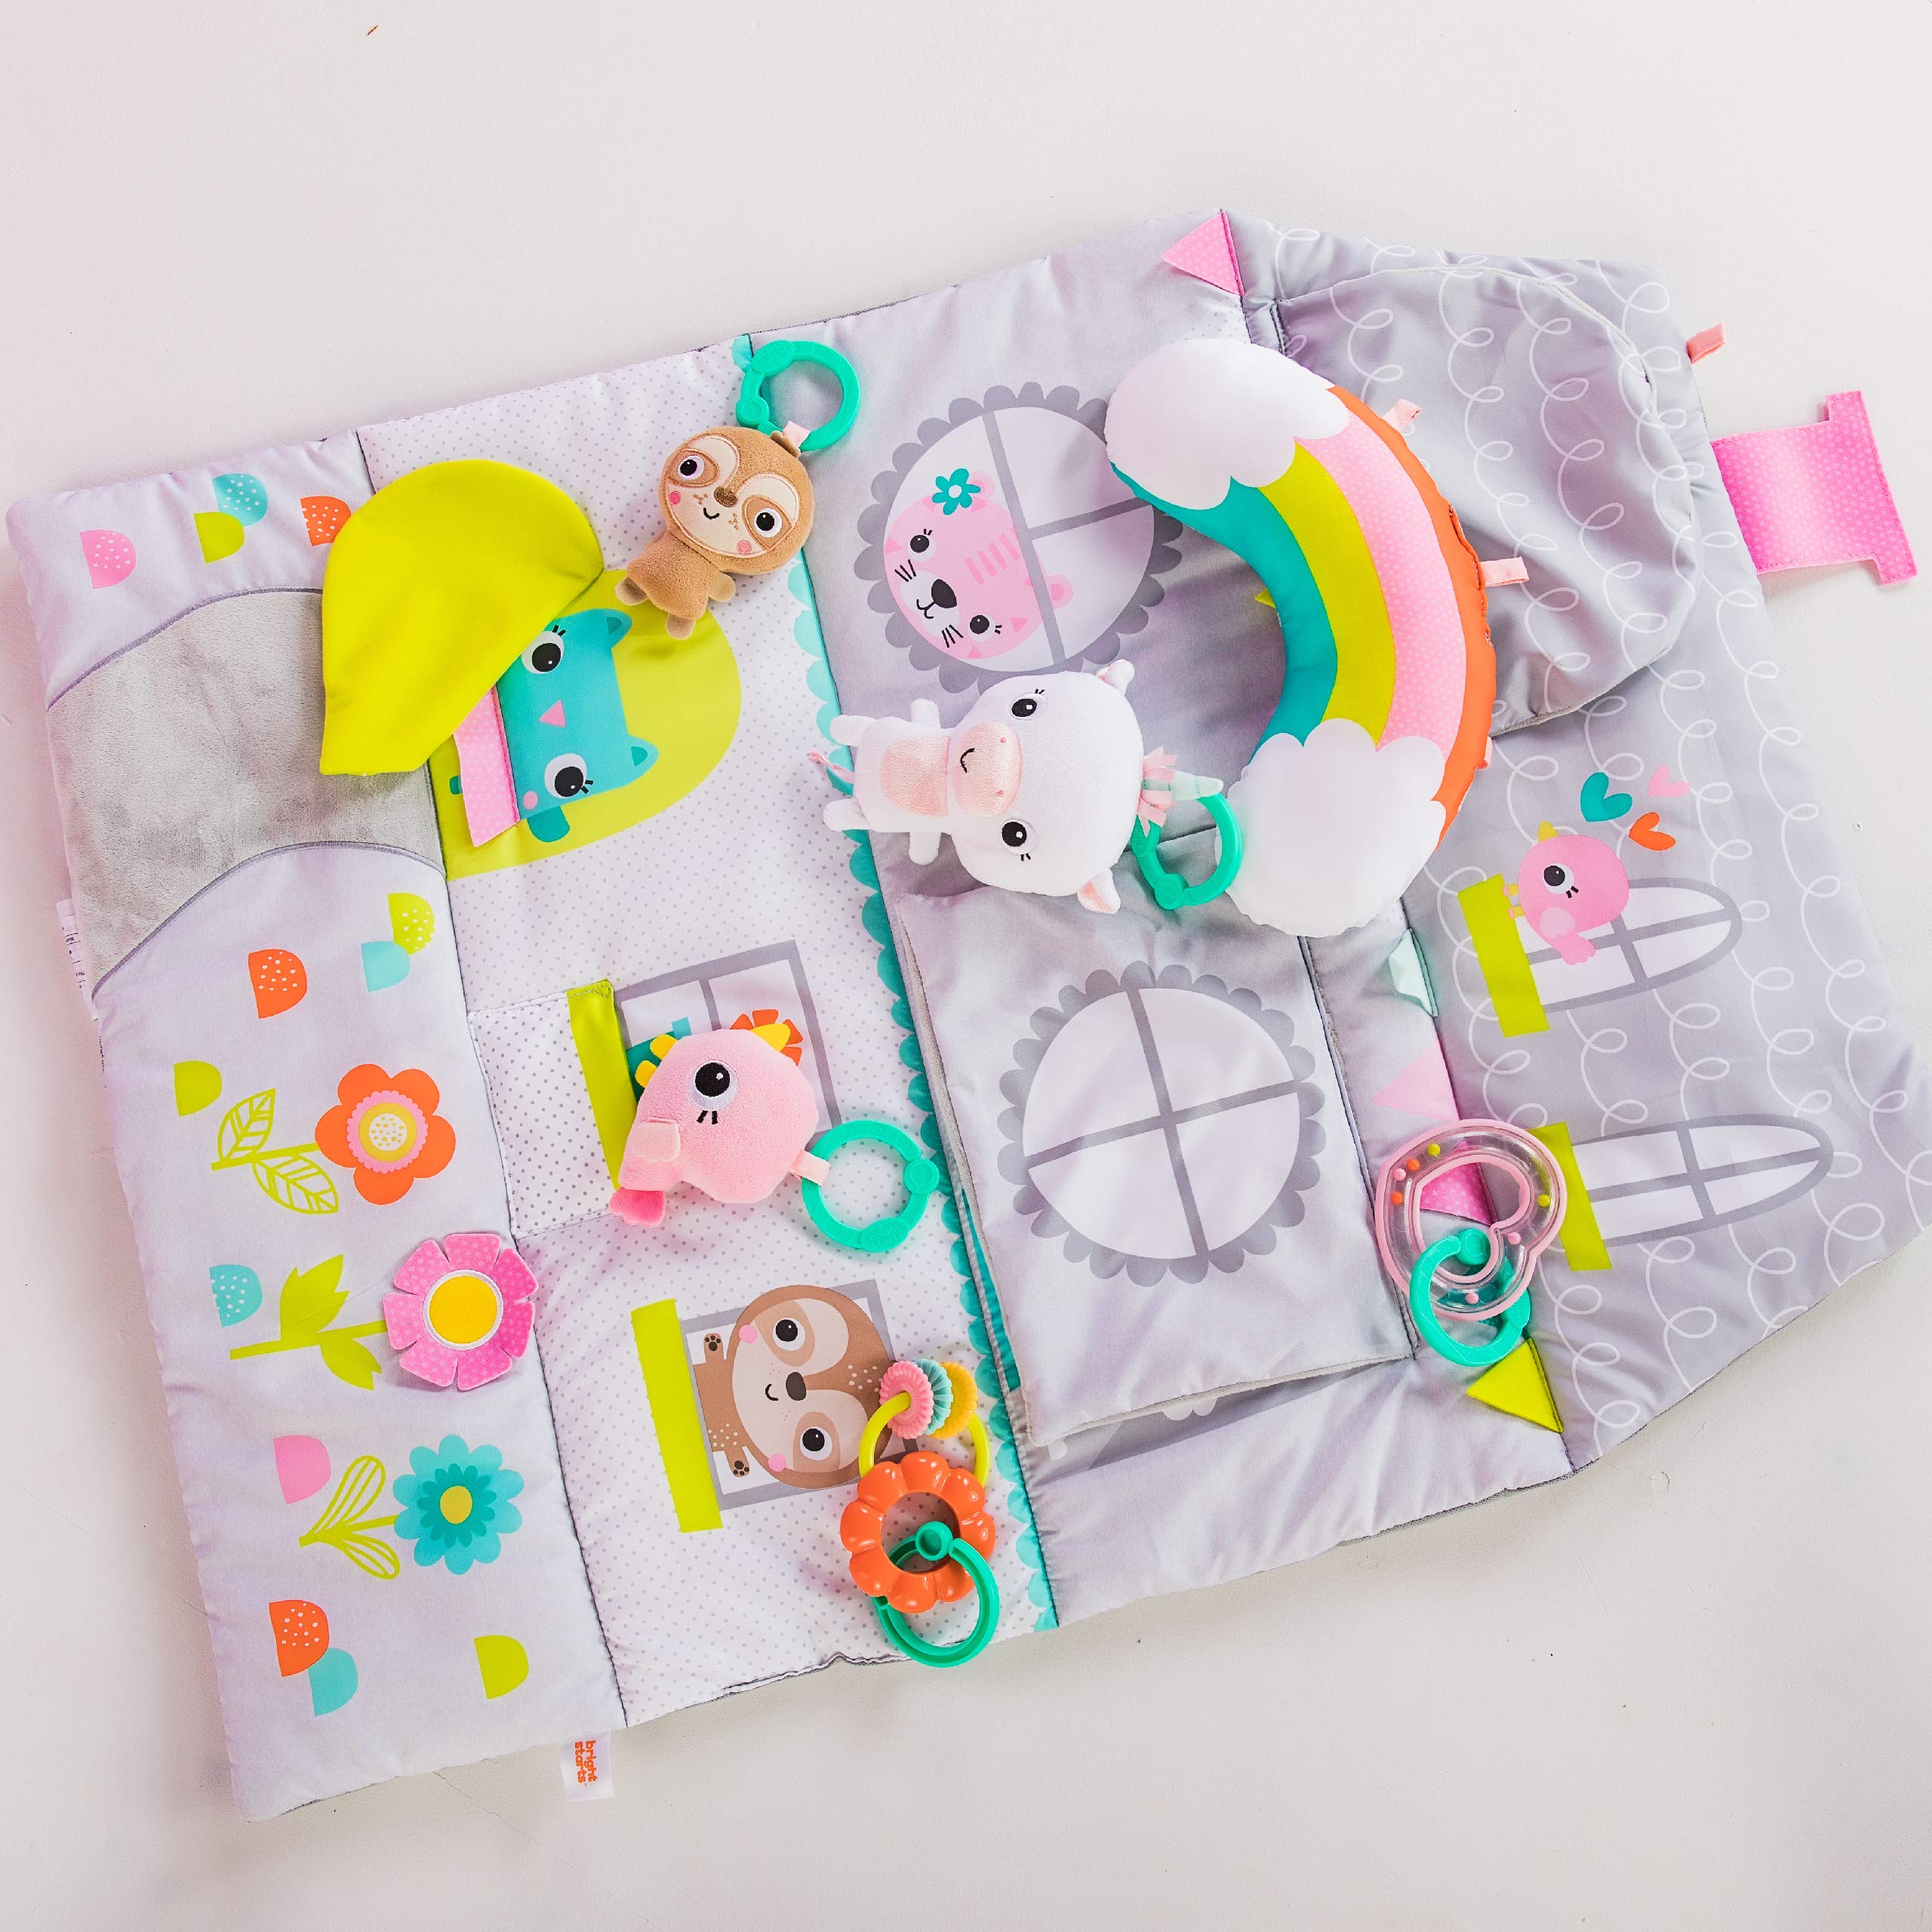 Momobebe Newborn to Toddler Play Gym and Play Mat - Dollhouse